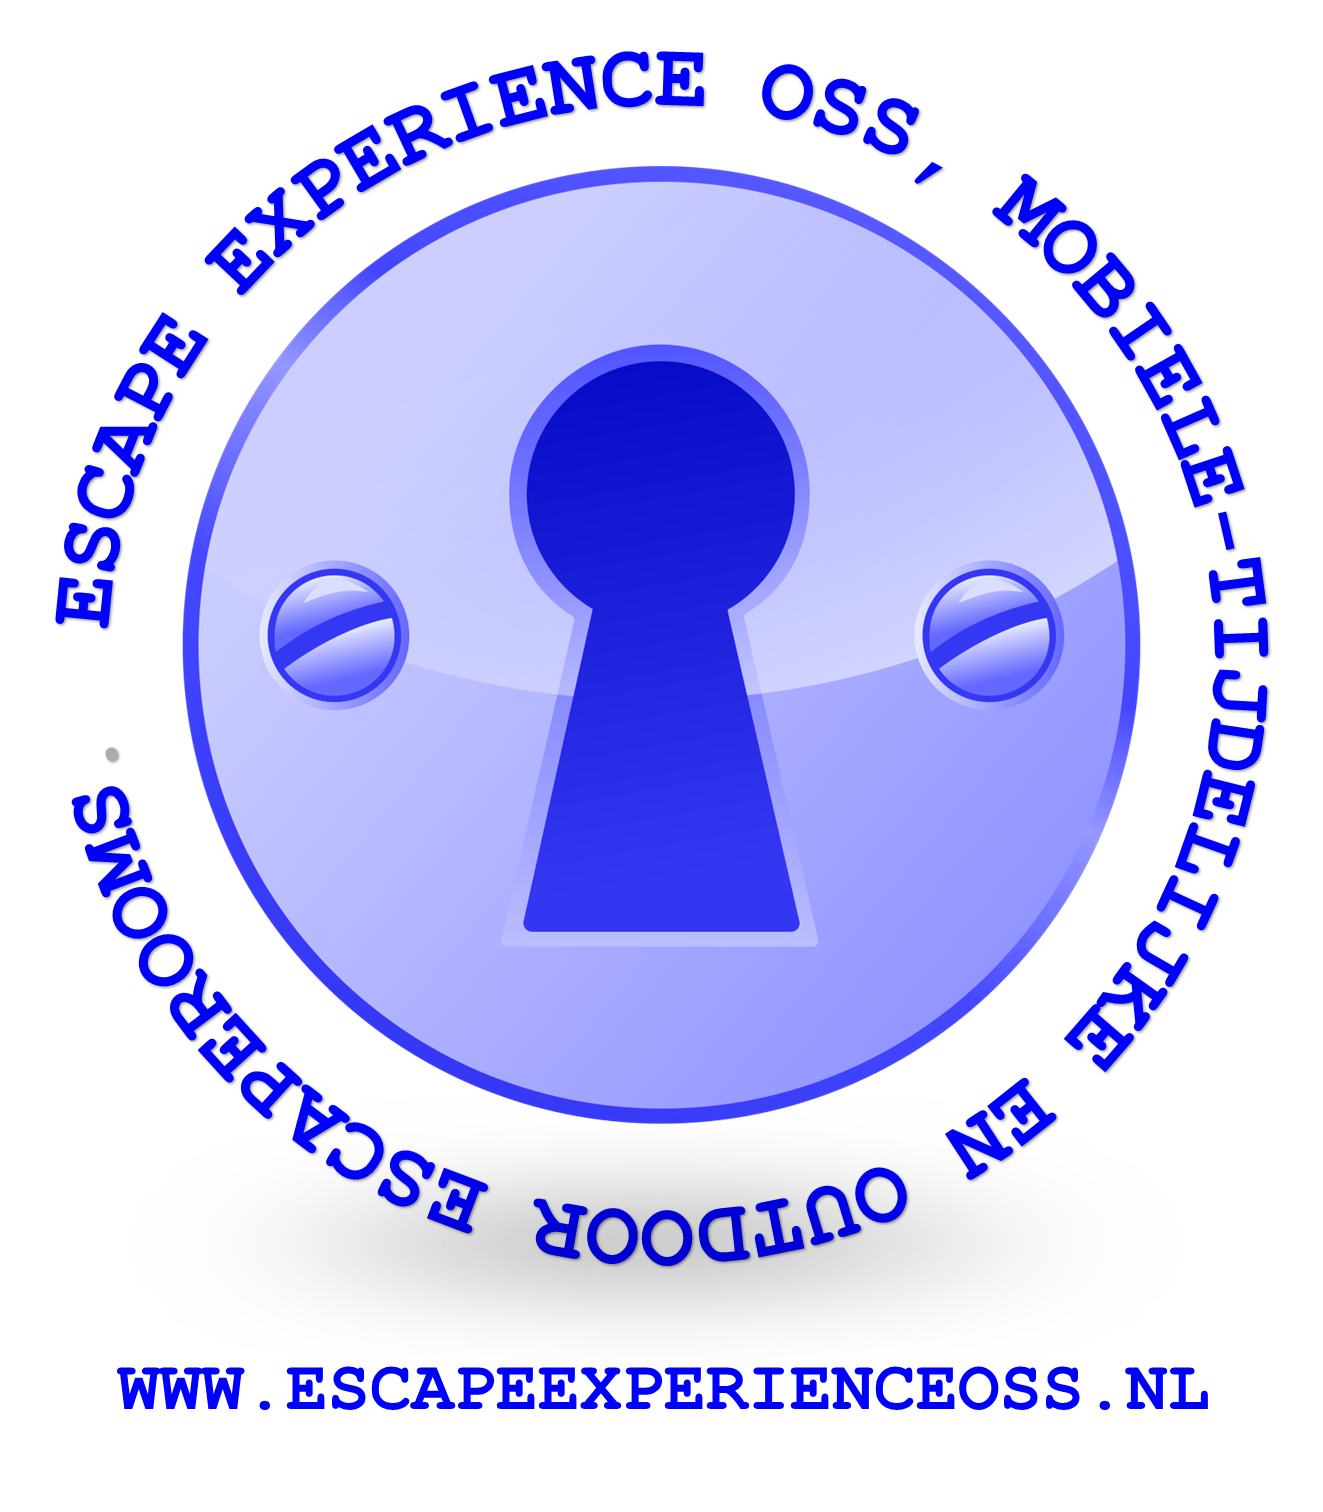 Escape Experience Oss